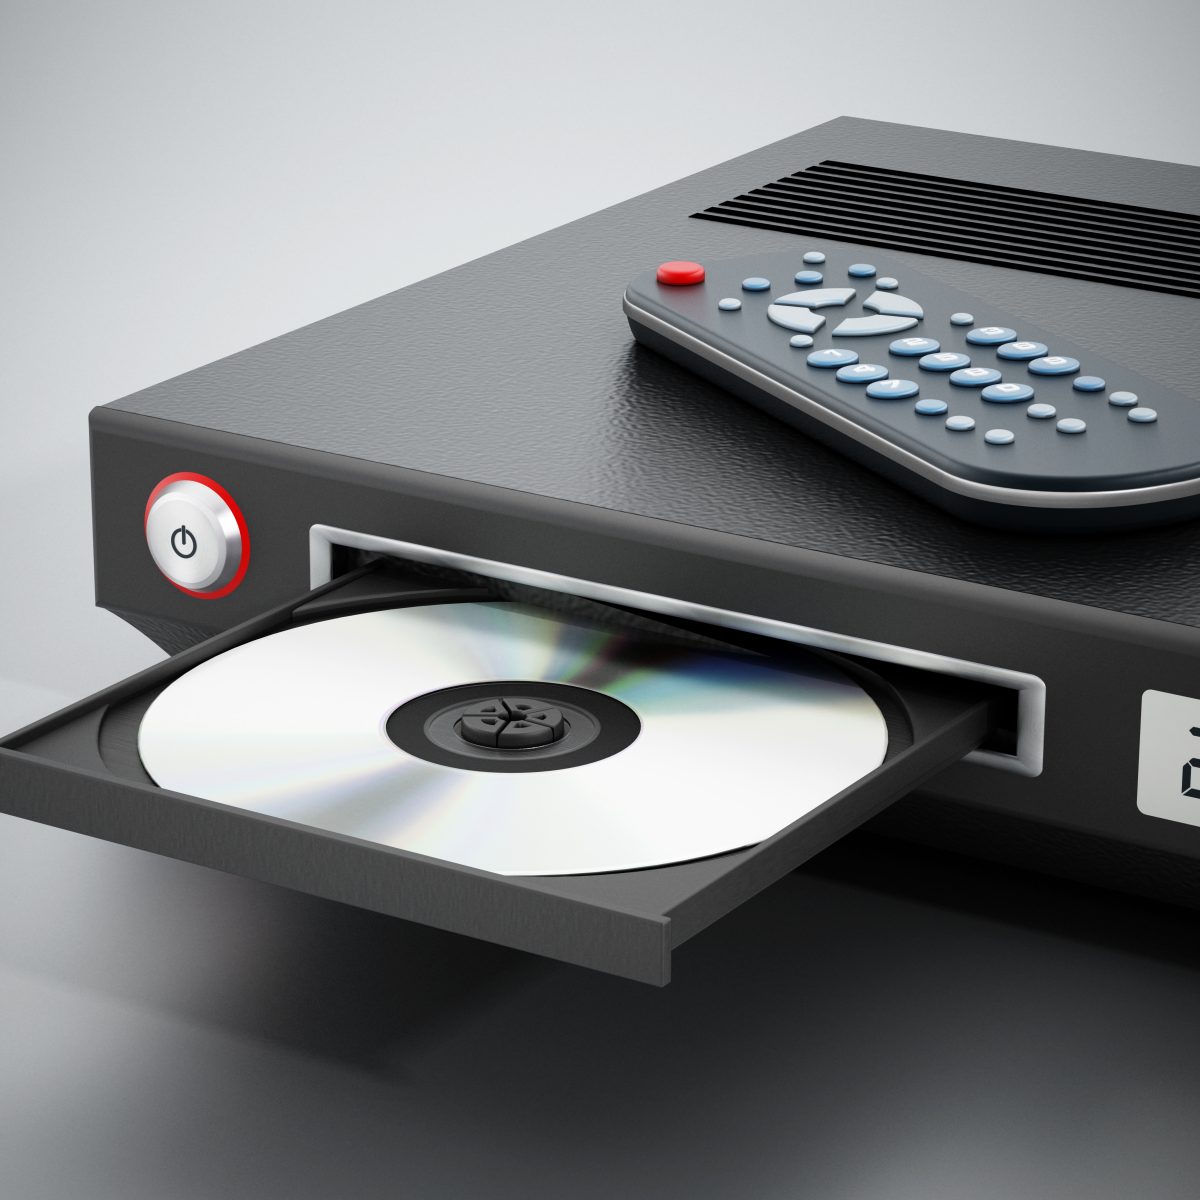 DVD Player In 2022: Do You Still Need One?